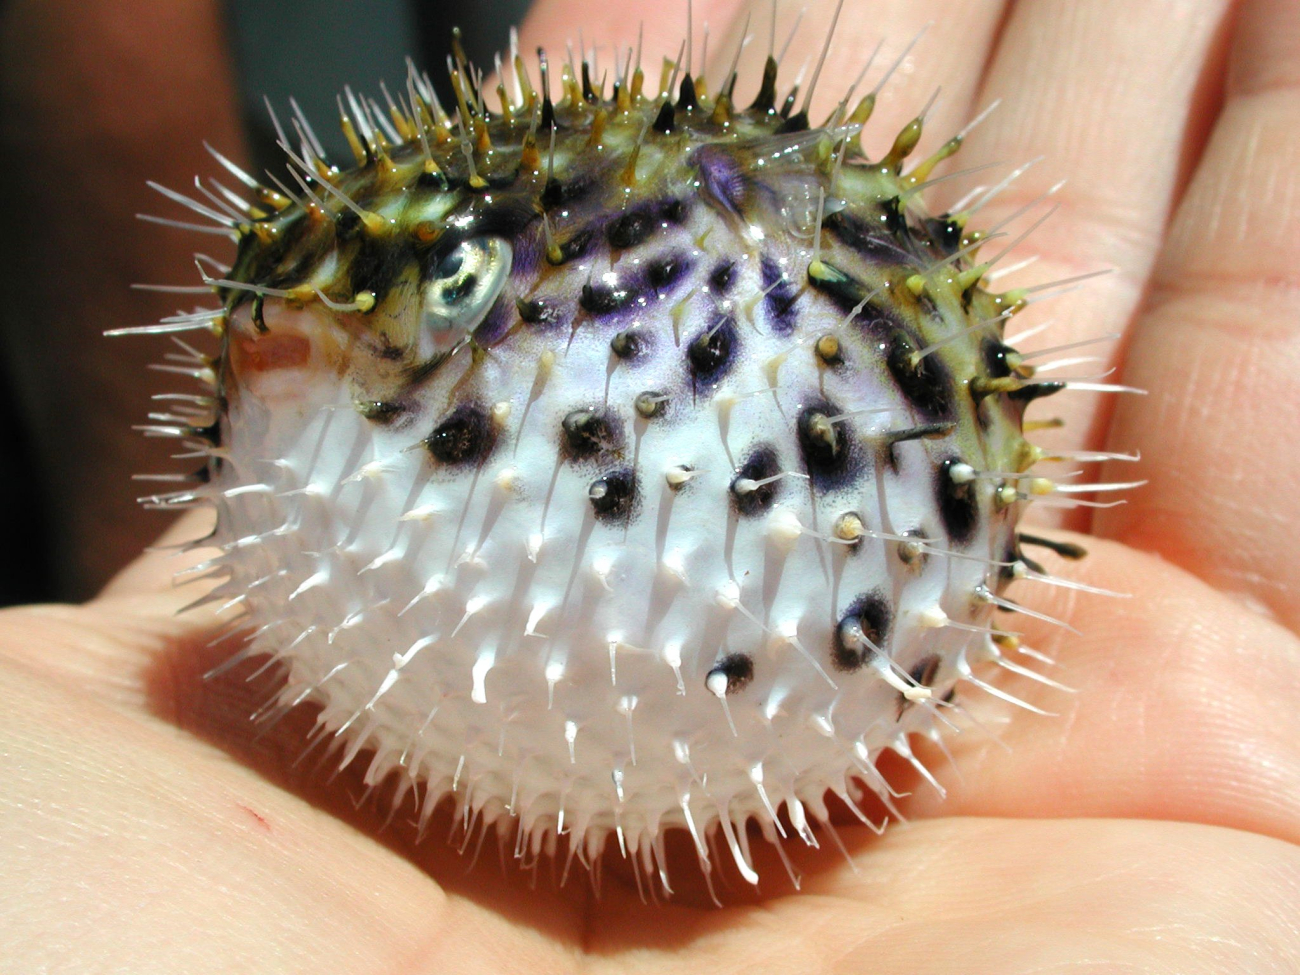 This tiny spiny puffer fish was caught in a neuston net tow